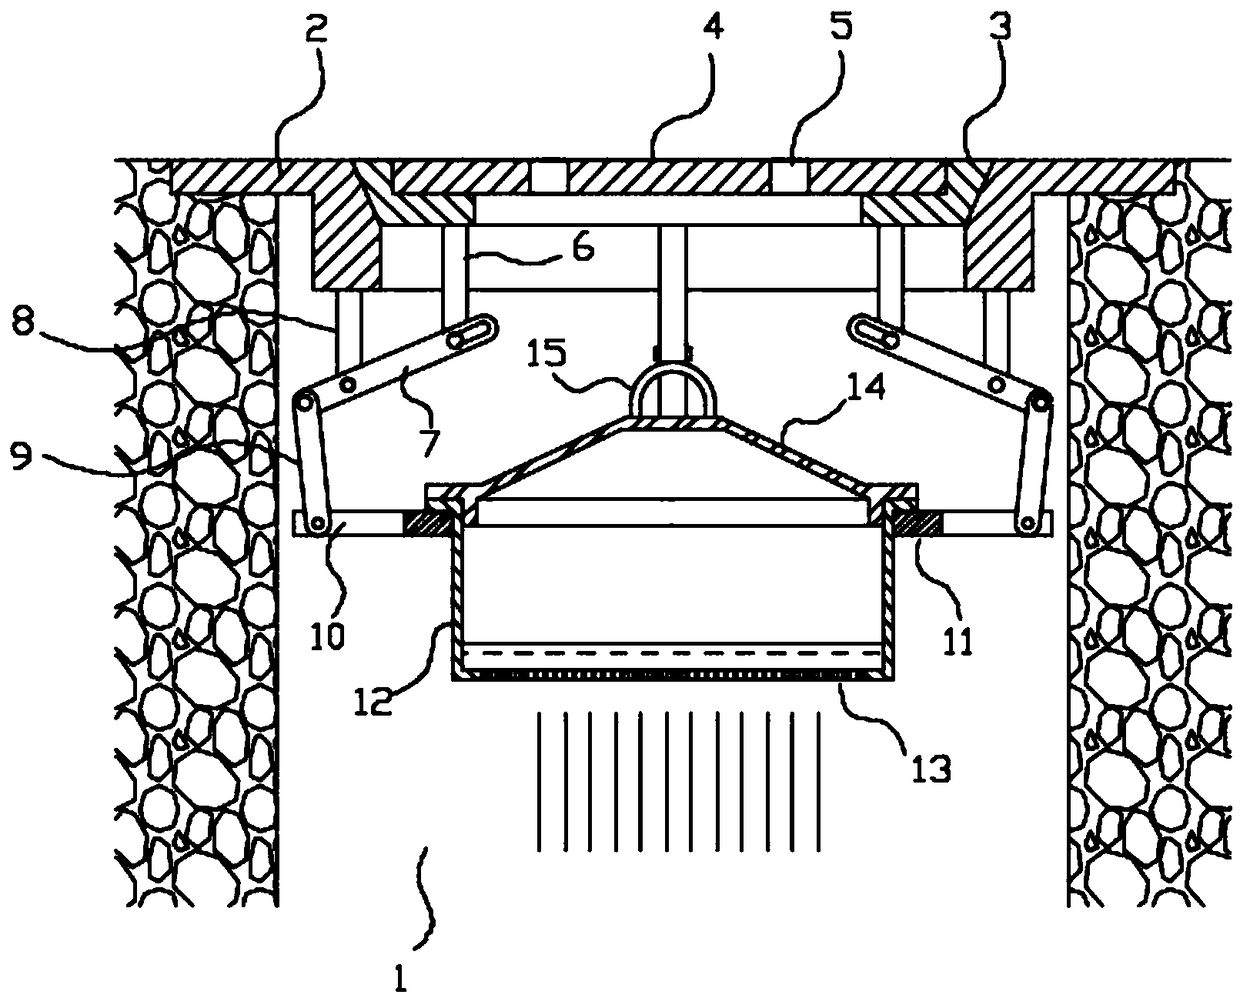 Anti-drop manhole cover device for automatically adjusting drainage